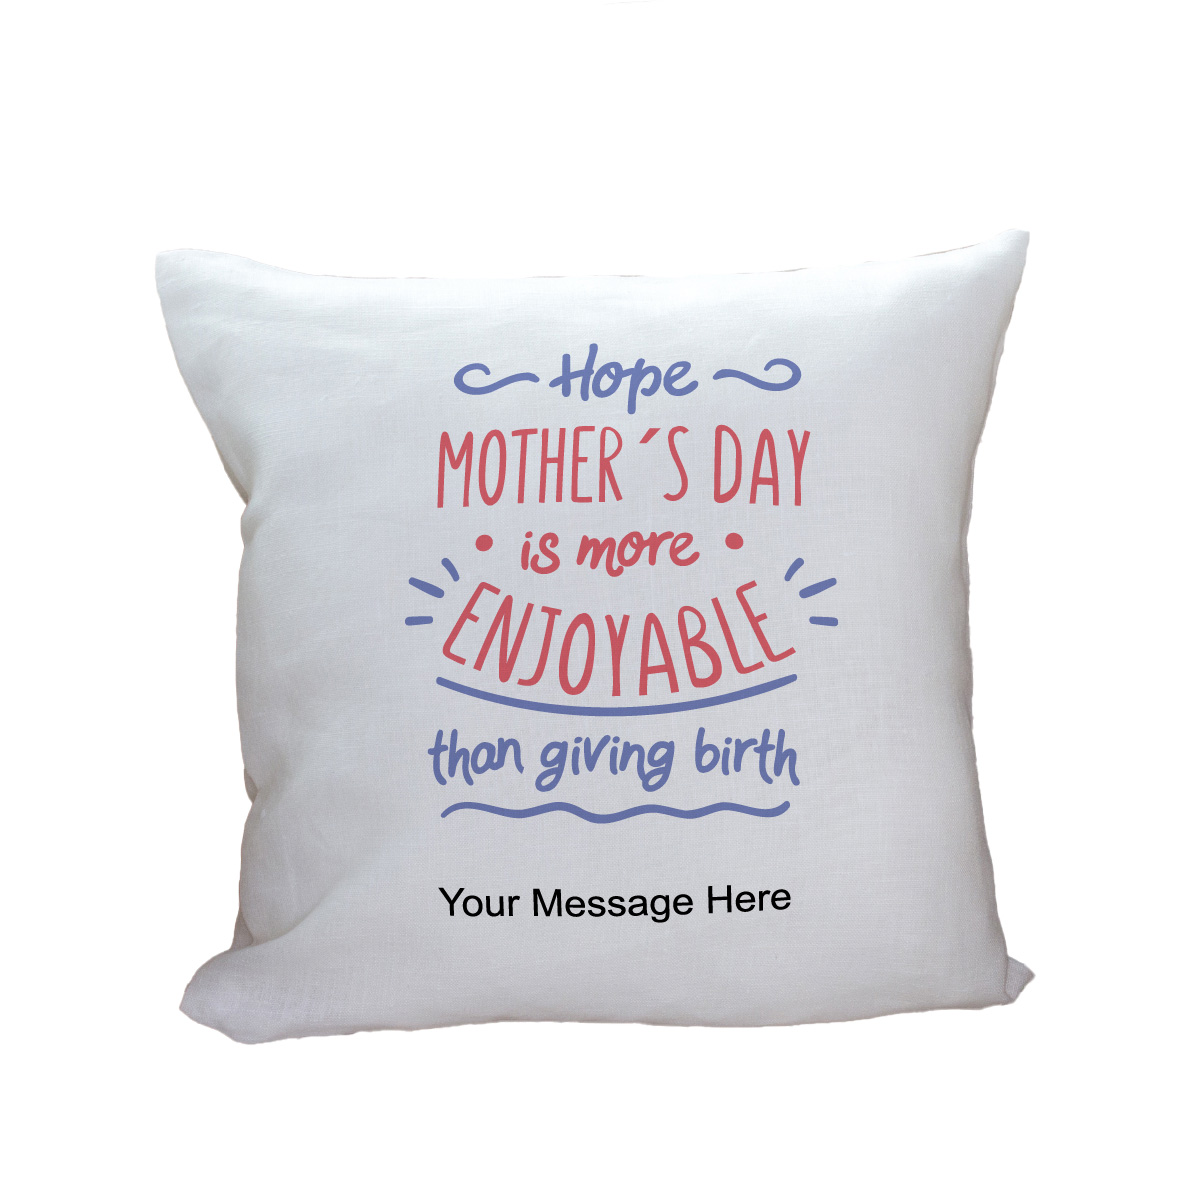 Funny saying on a pillow for Mother's Day.  Pillow says "Hope Mother's Day is more enjoyable than giving birth".